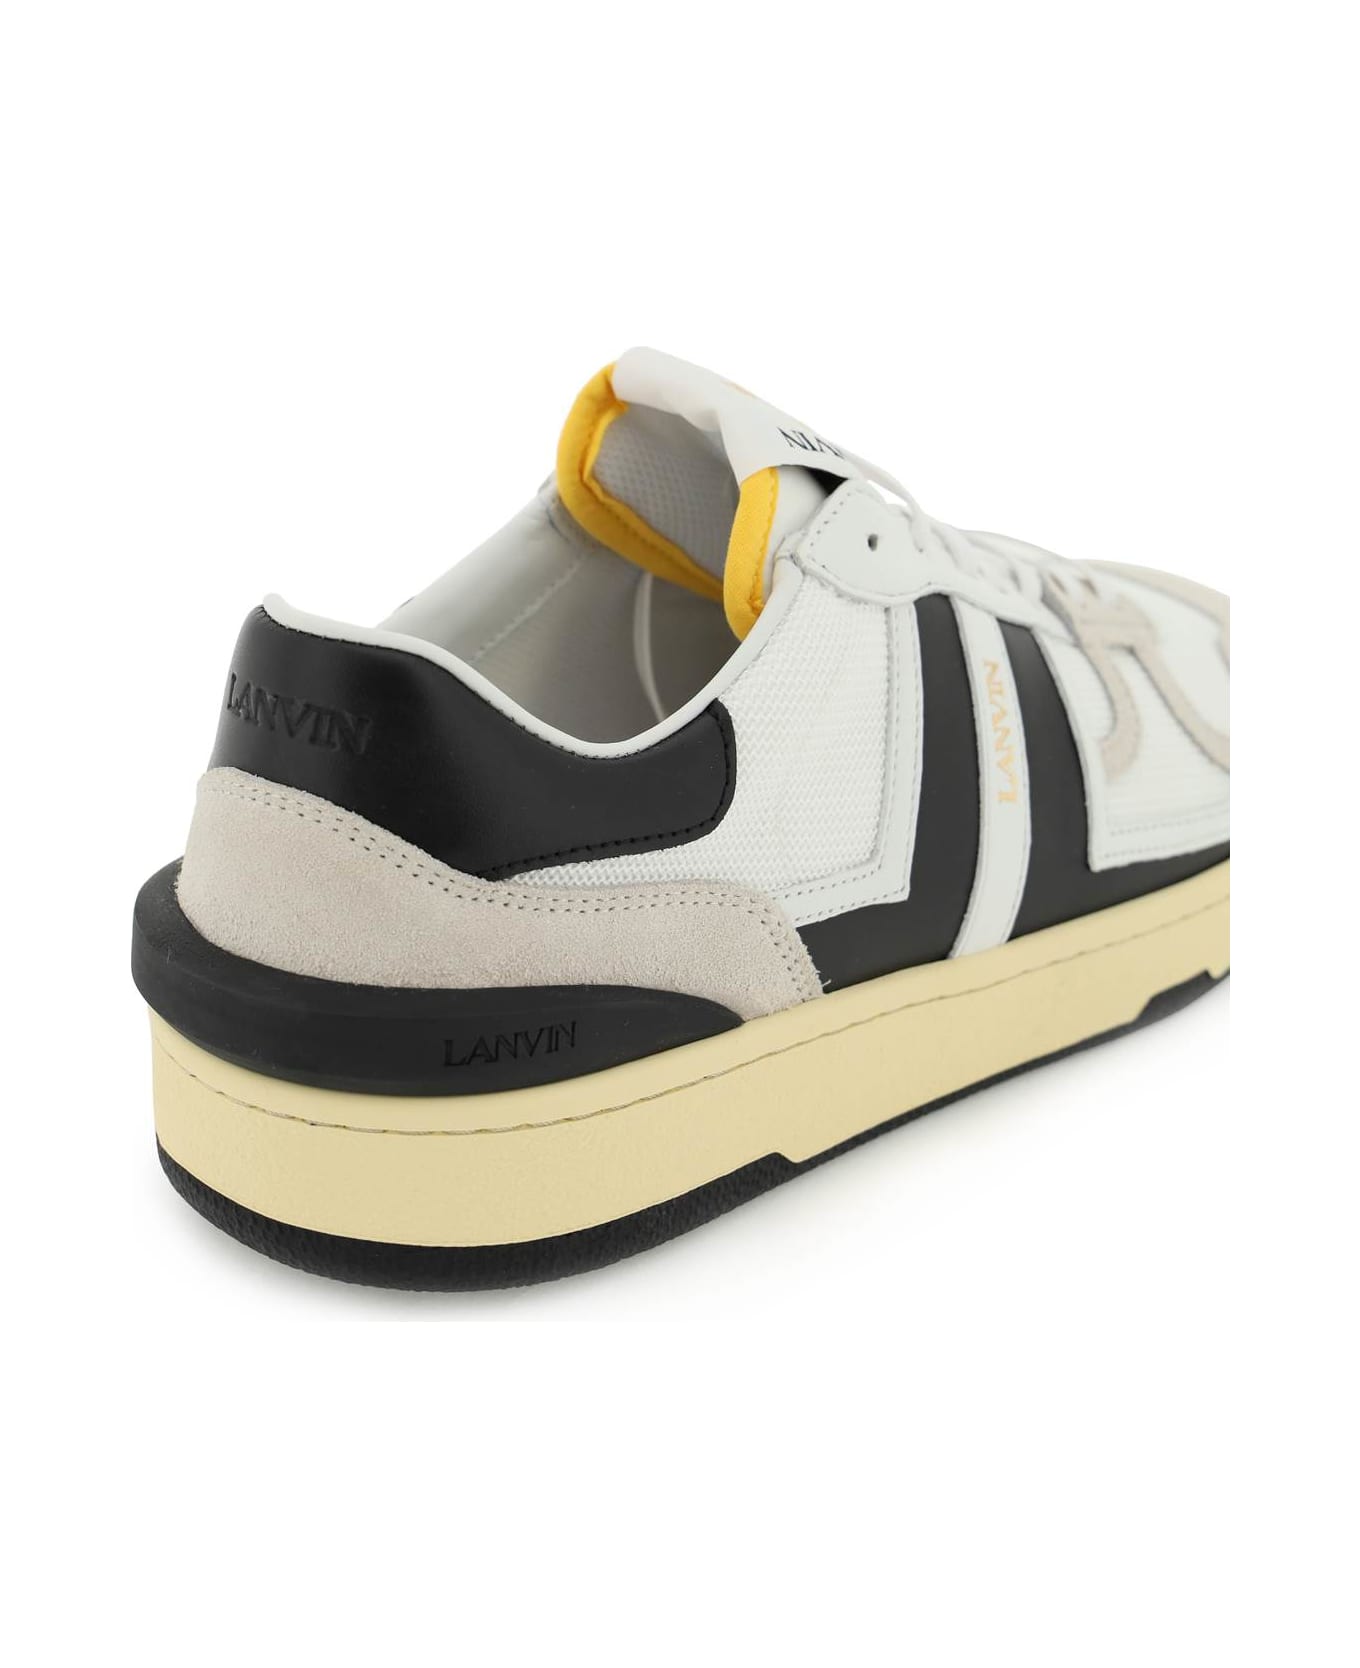 Lanvin 'clay' Sneakers - WHITE スニーカー